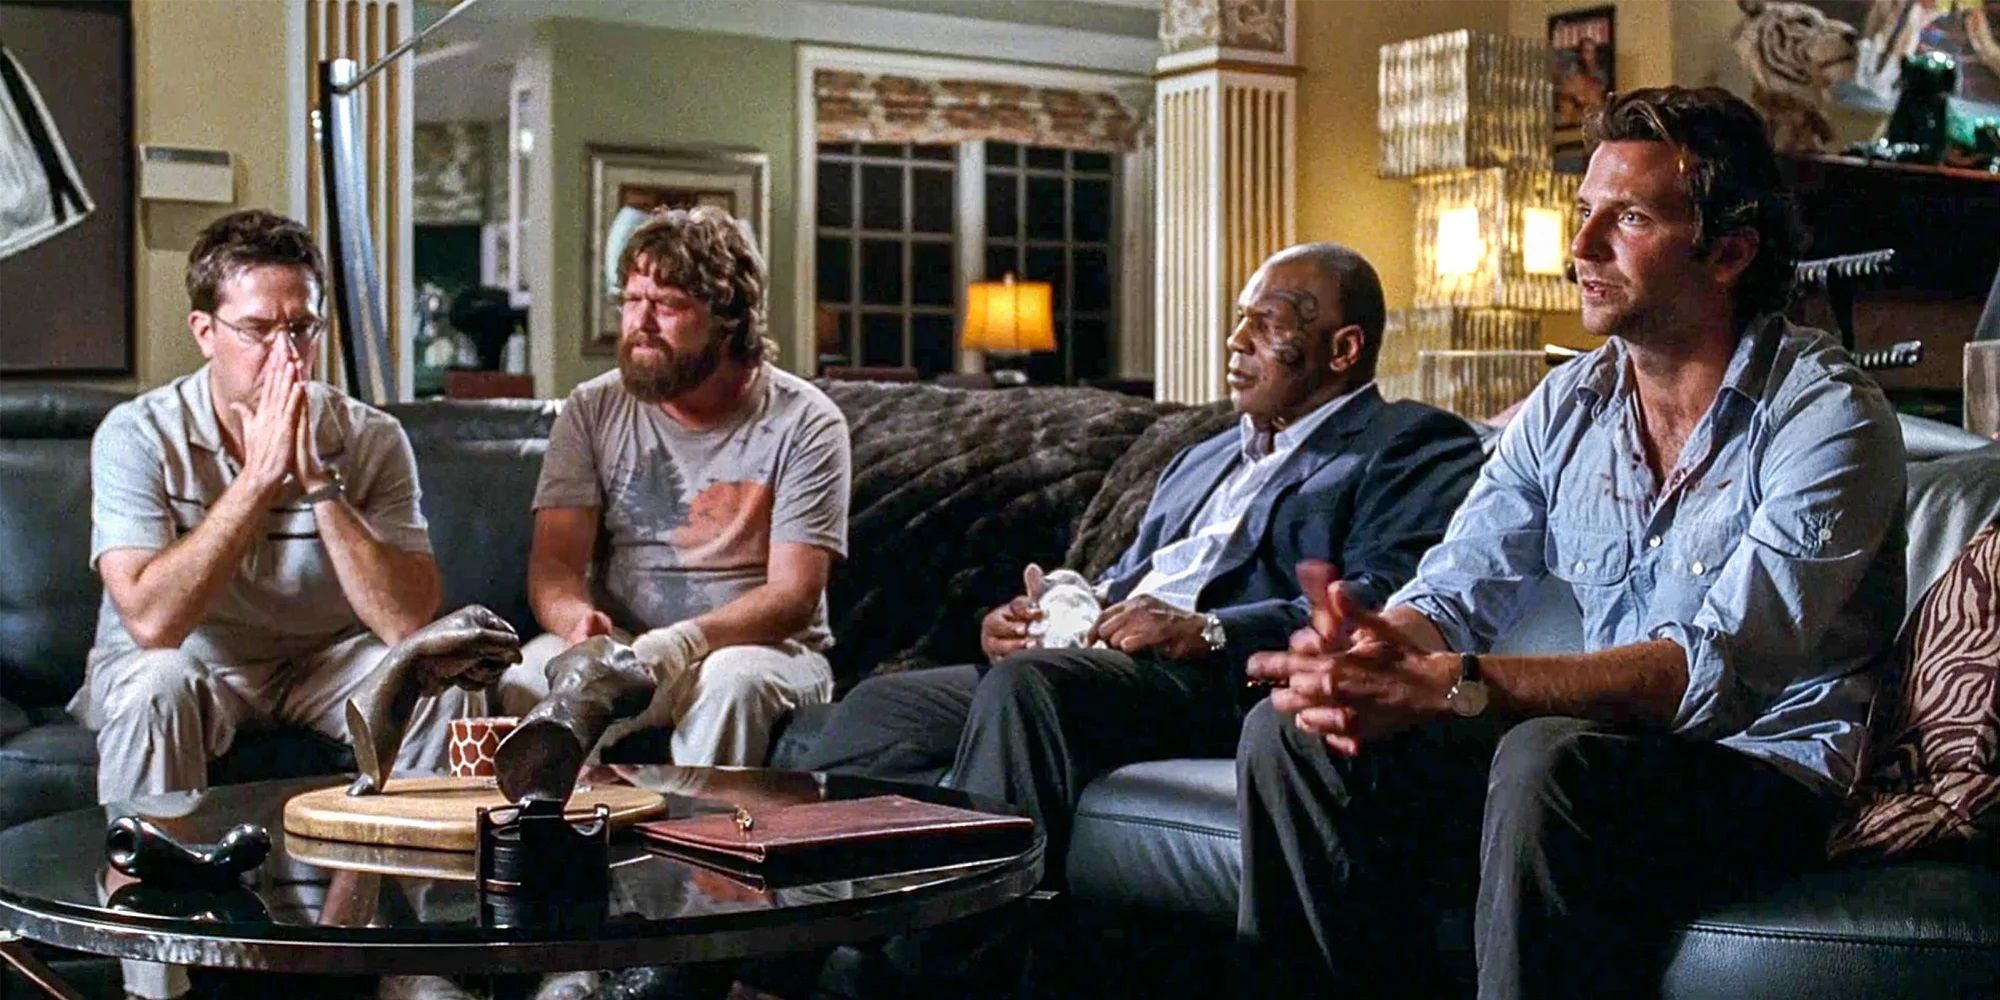 Mike Tyson's cameo in The Hangover